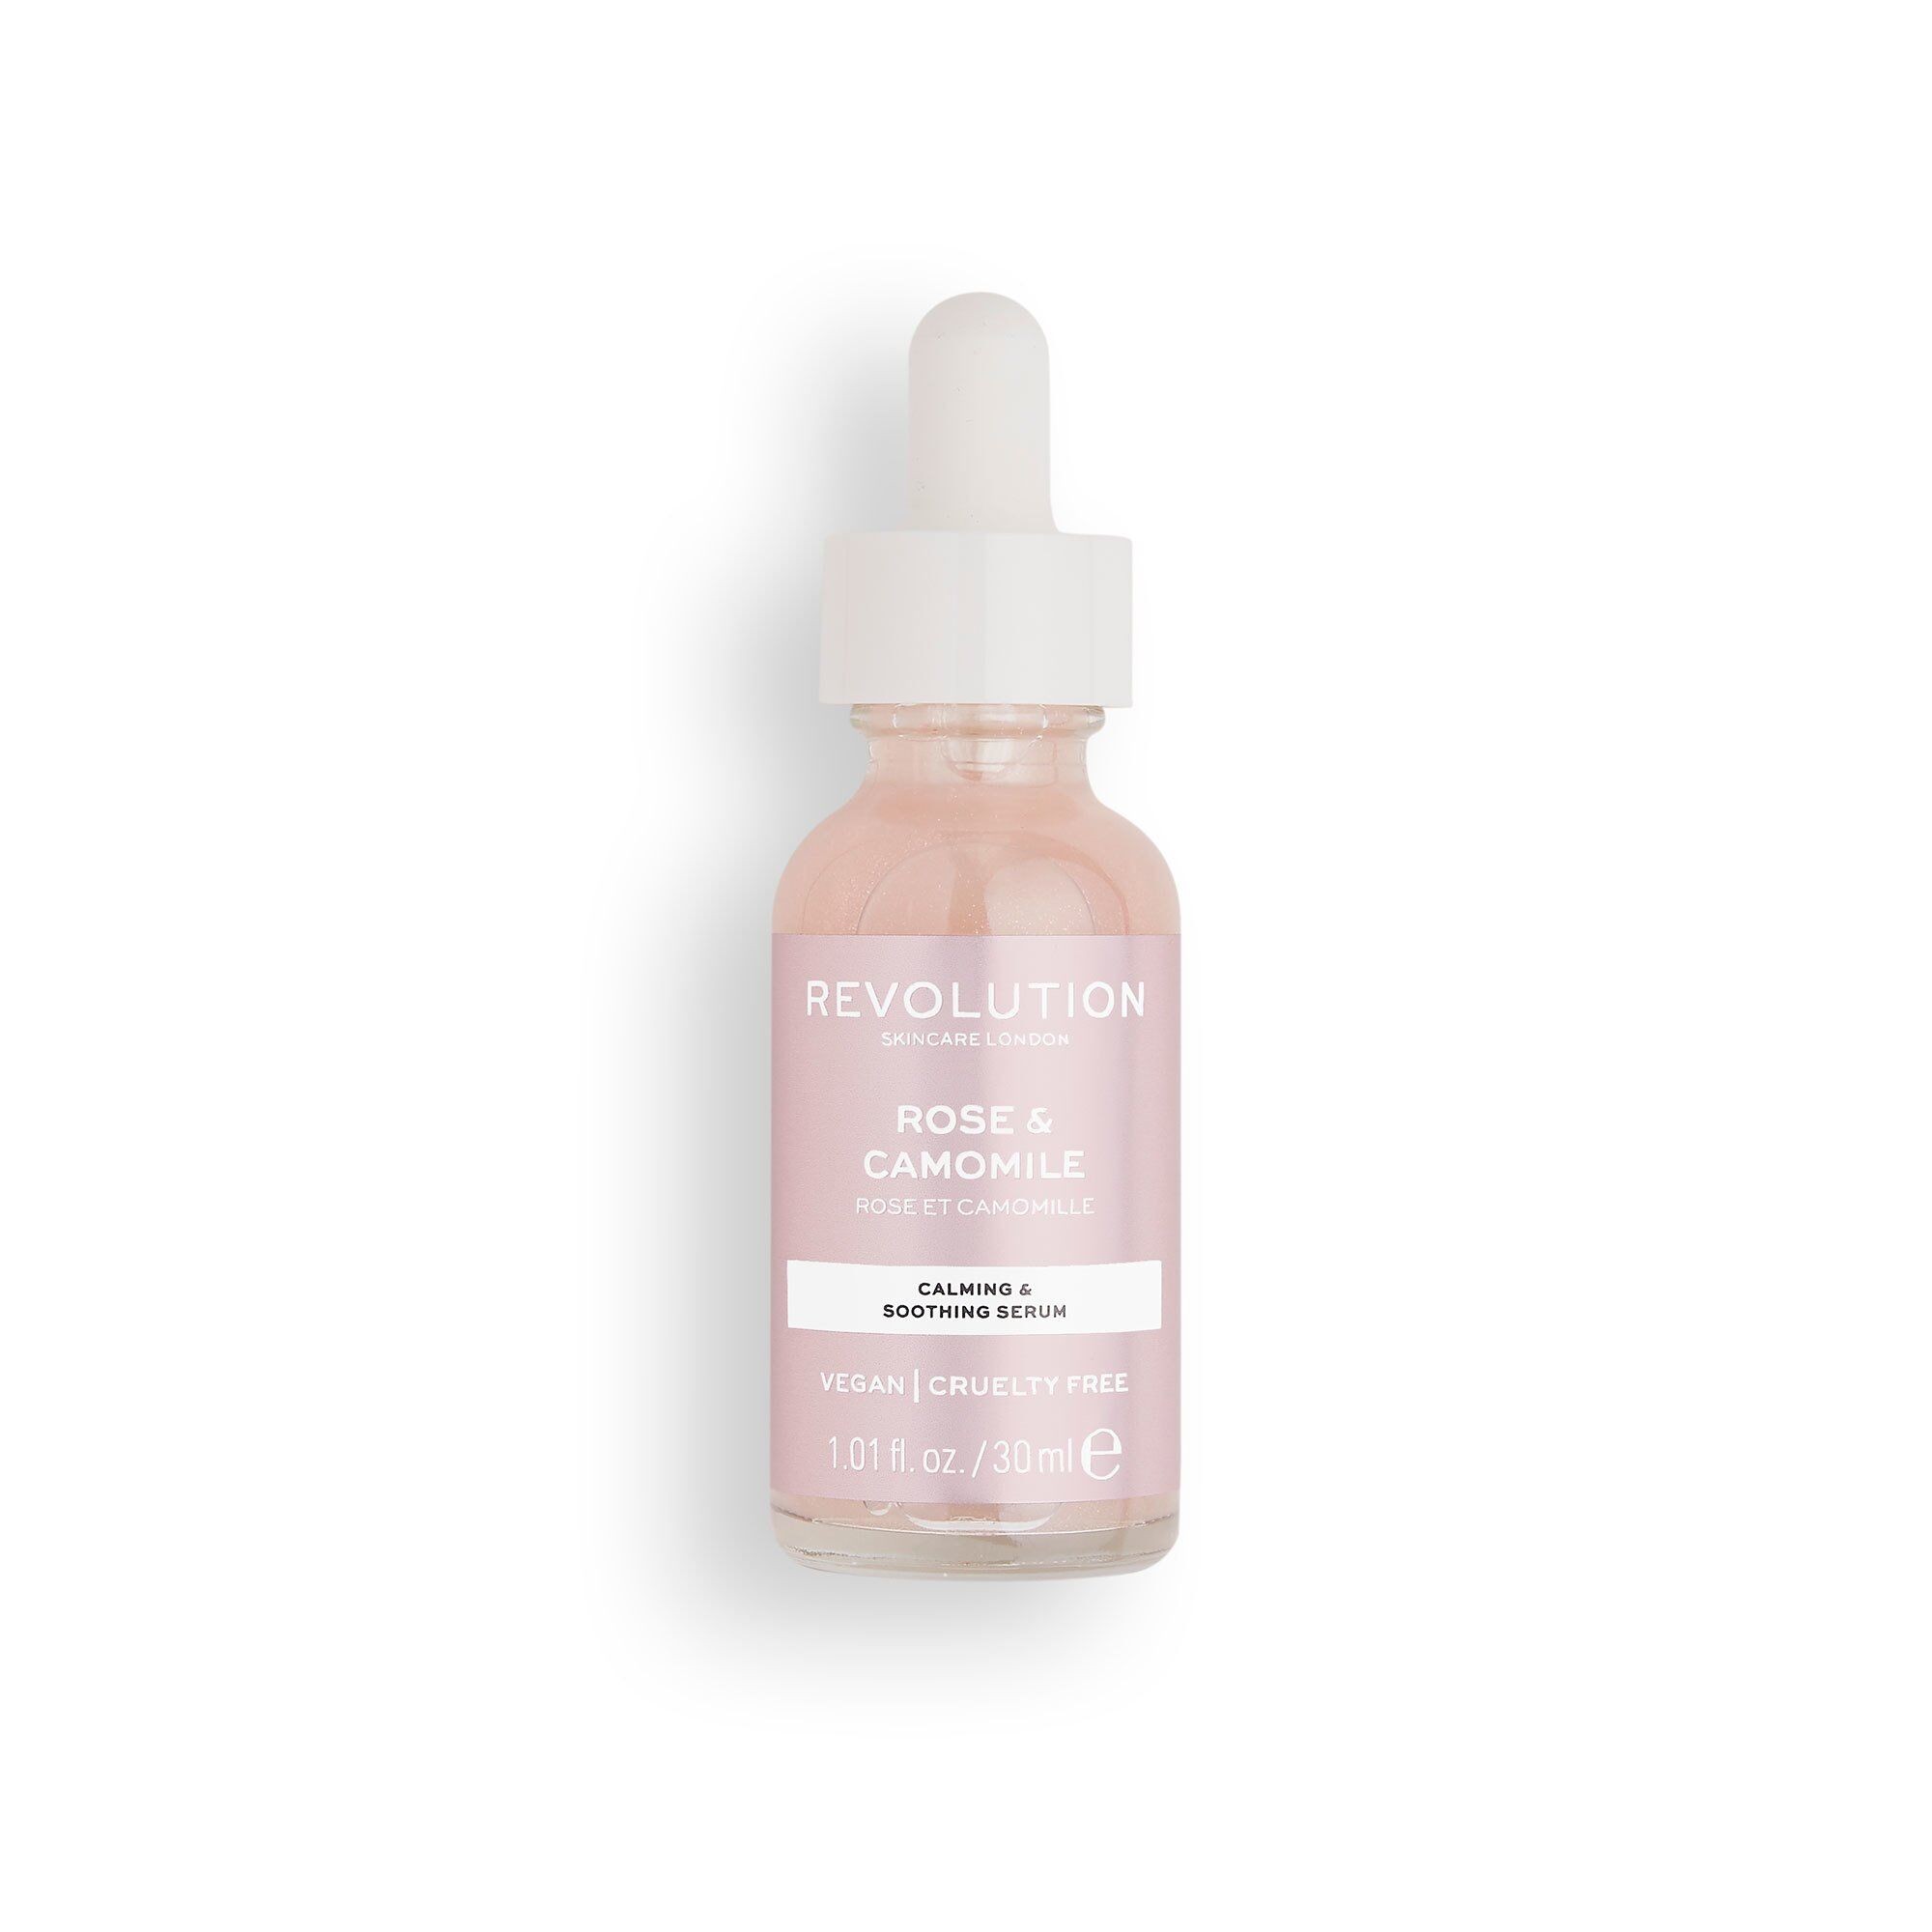 Sérum Rose & Camomille - Calming & Soothing Serum - Rose & Camomile